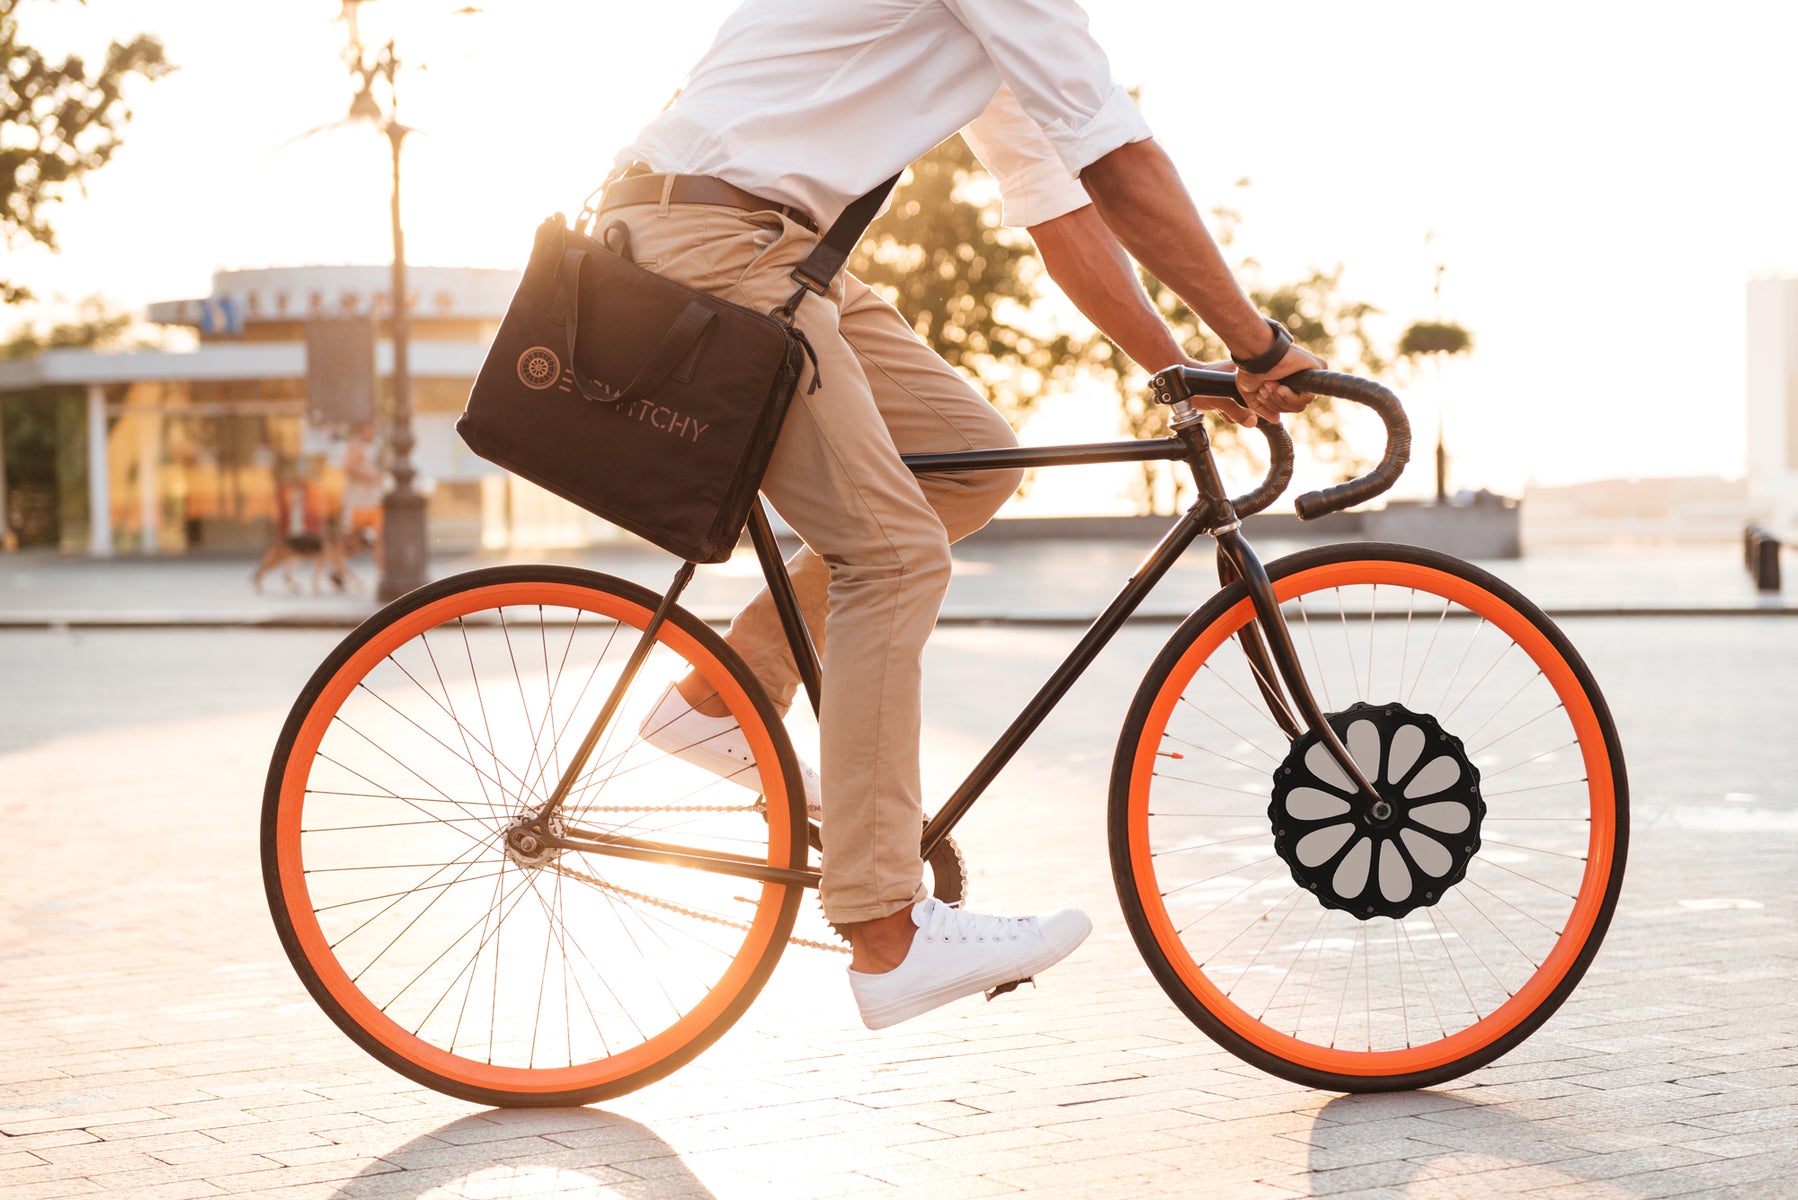 Switch One Electric bike kit to convert your bicycle into ebike